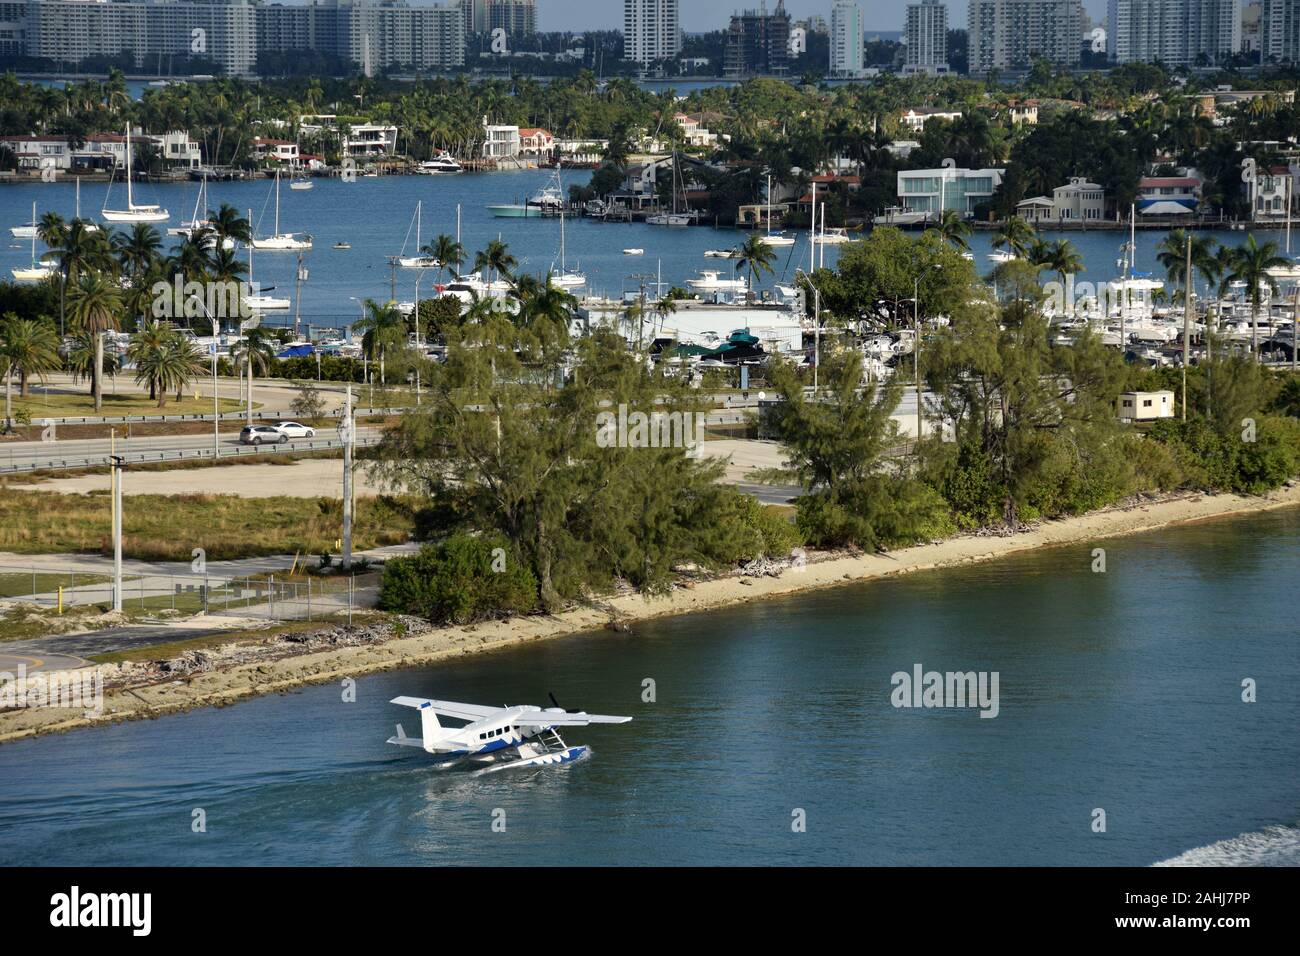 Seaplane departs from the waterways of Miami to the Caribbean Stock Photo